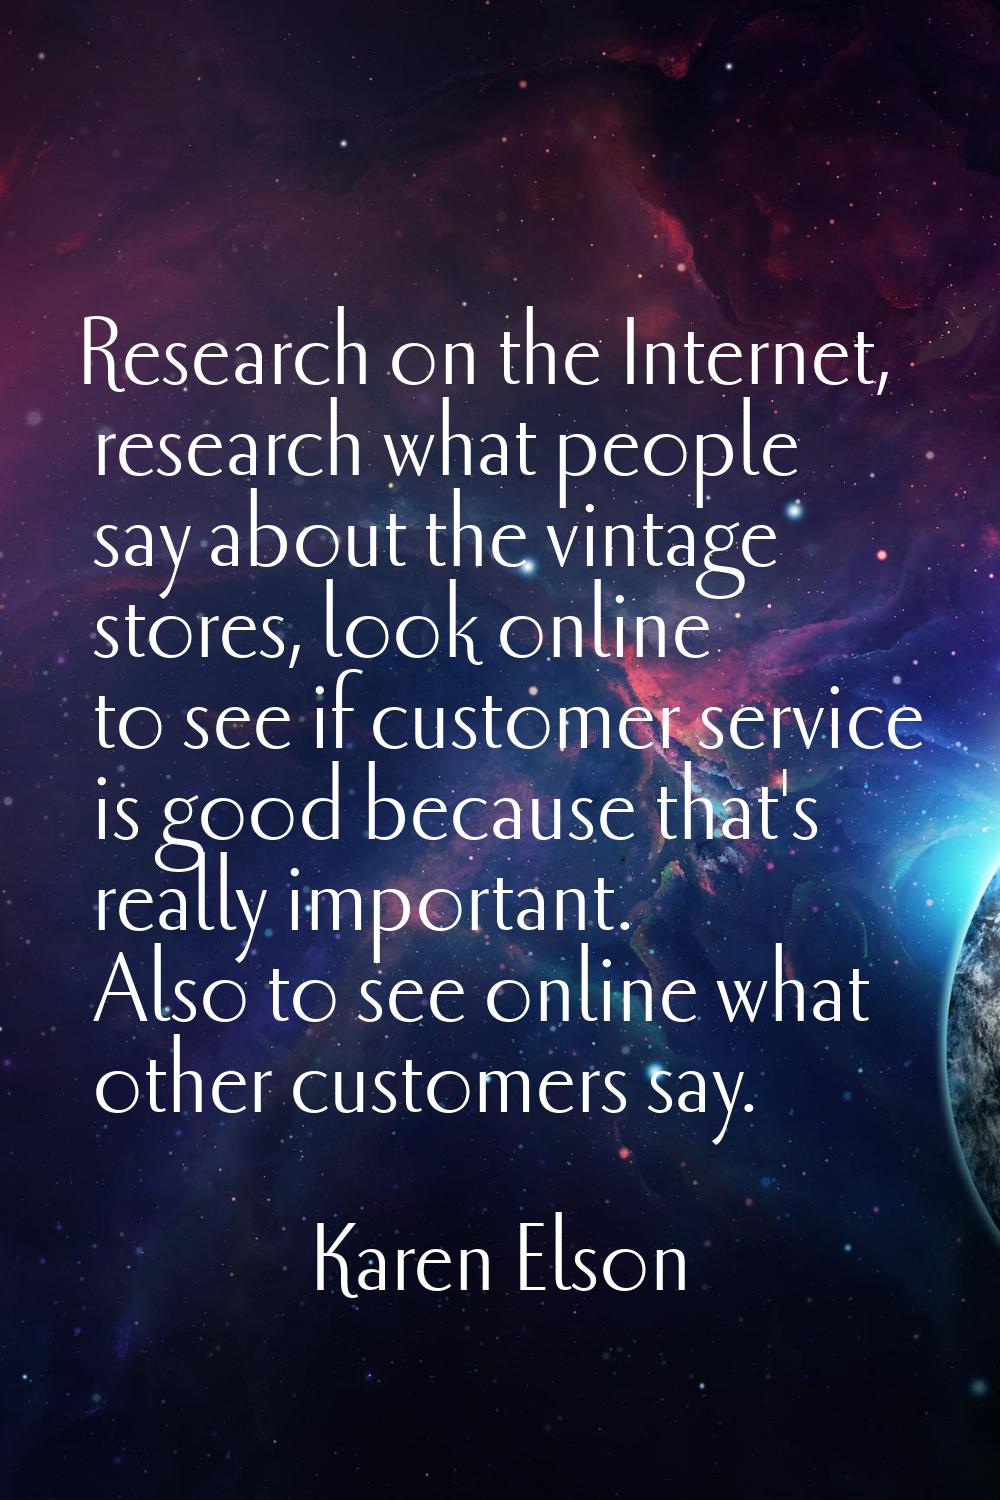 Research on the Internet, research what people say about the vintage stores, look online to see if 